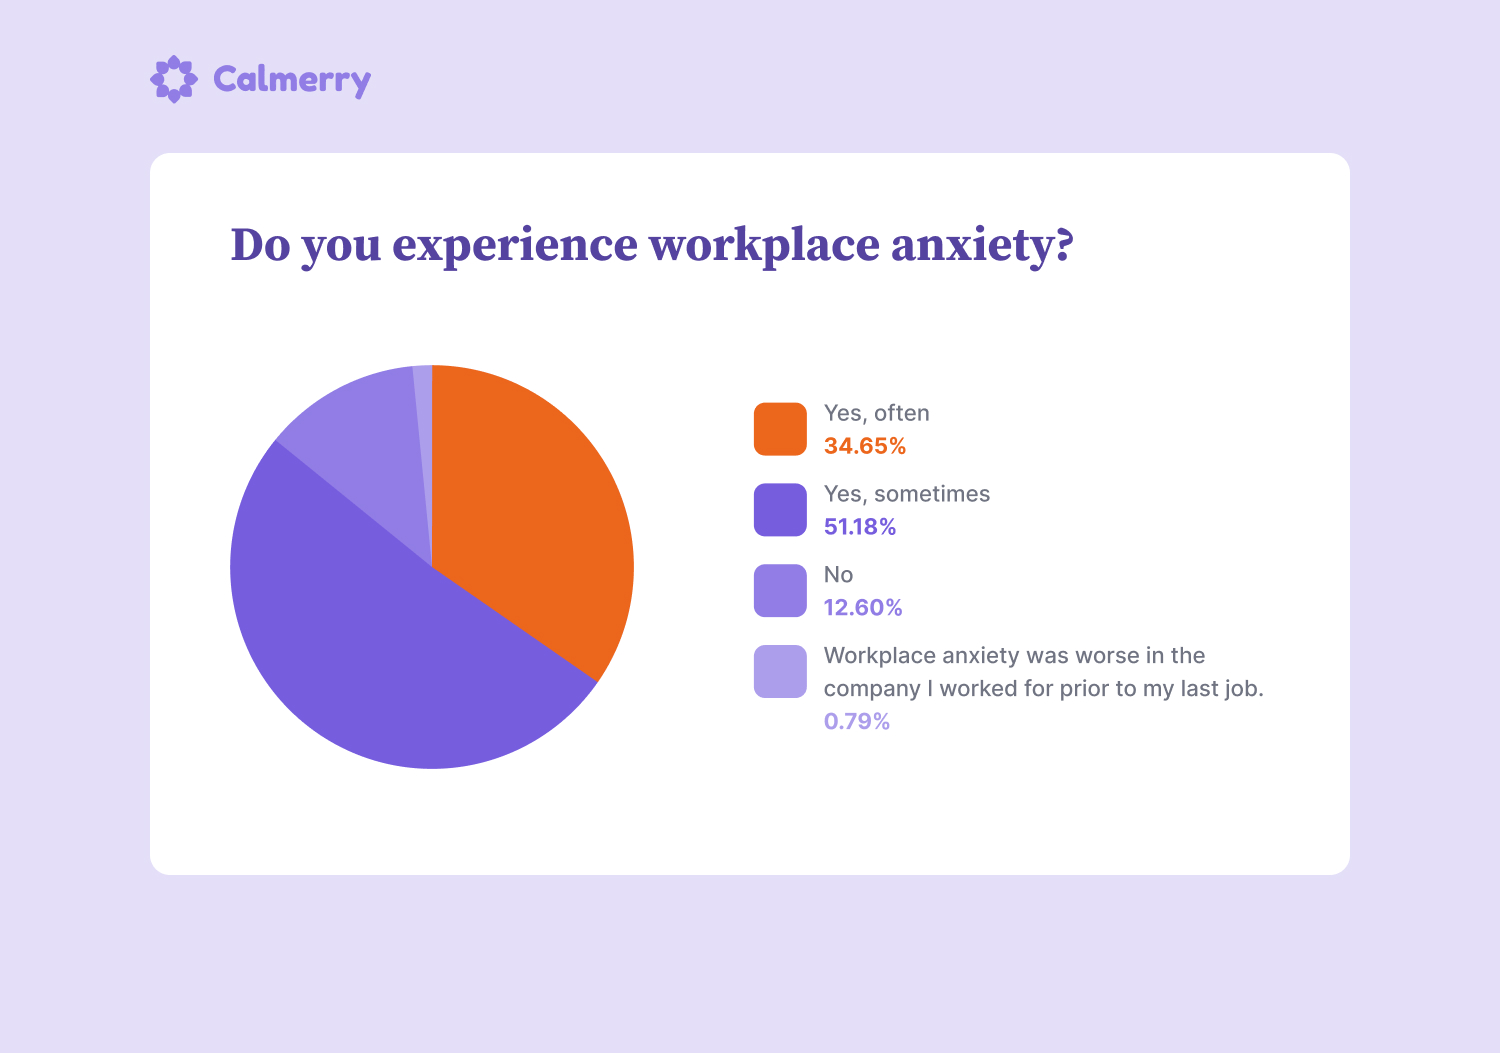 Do you experience workplace anxiety? Yes, often 44 34.65% Yes, sometimes 65 51.18% No 16 12.60% Workplace anxiety was worse in the company I worked for prior to my last job. 1 0.79%